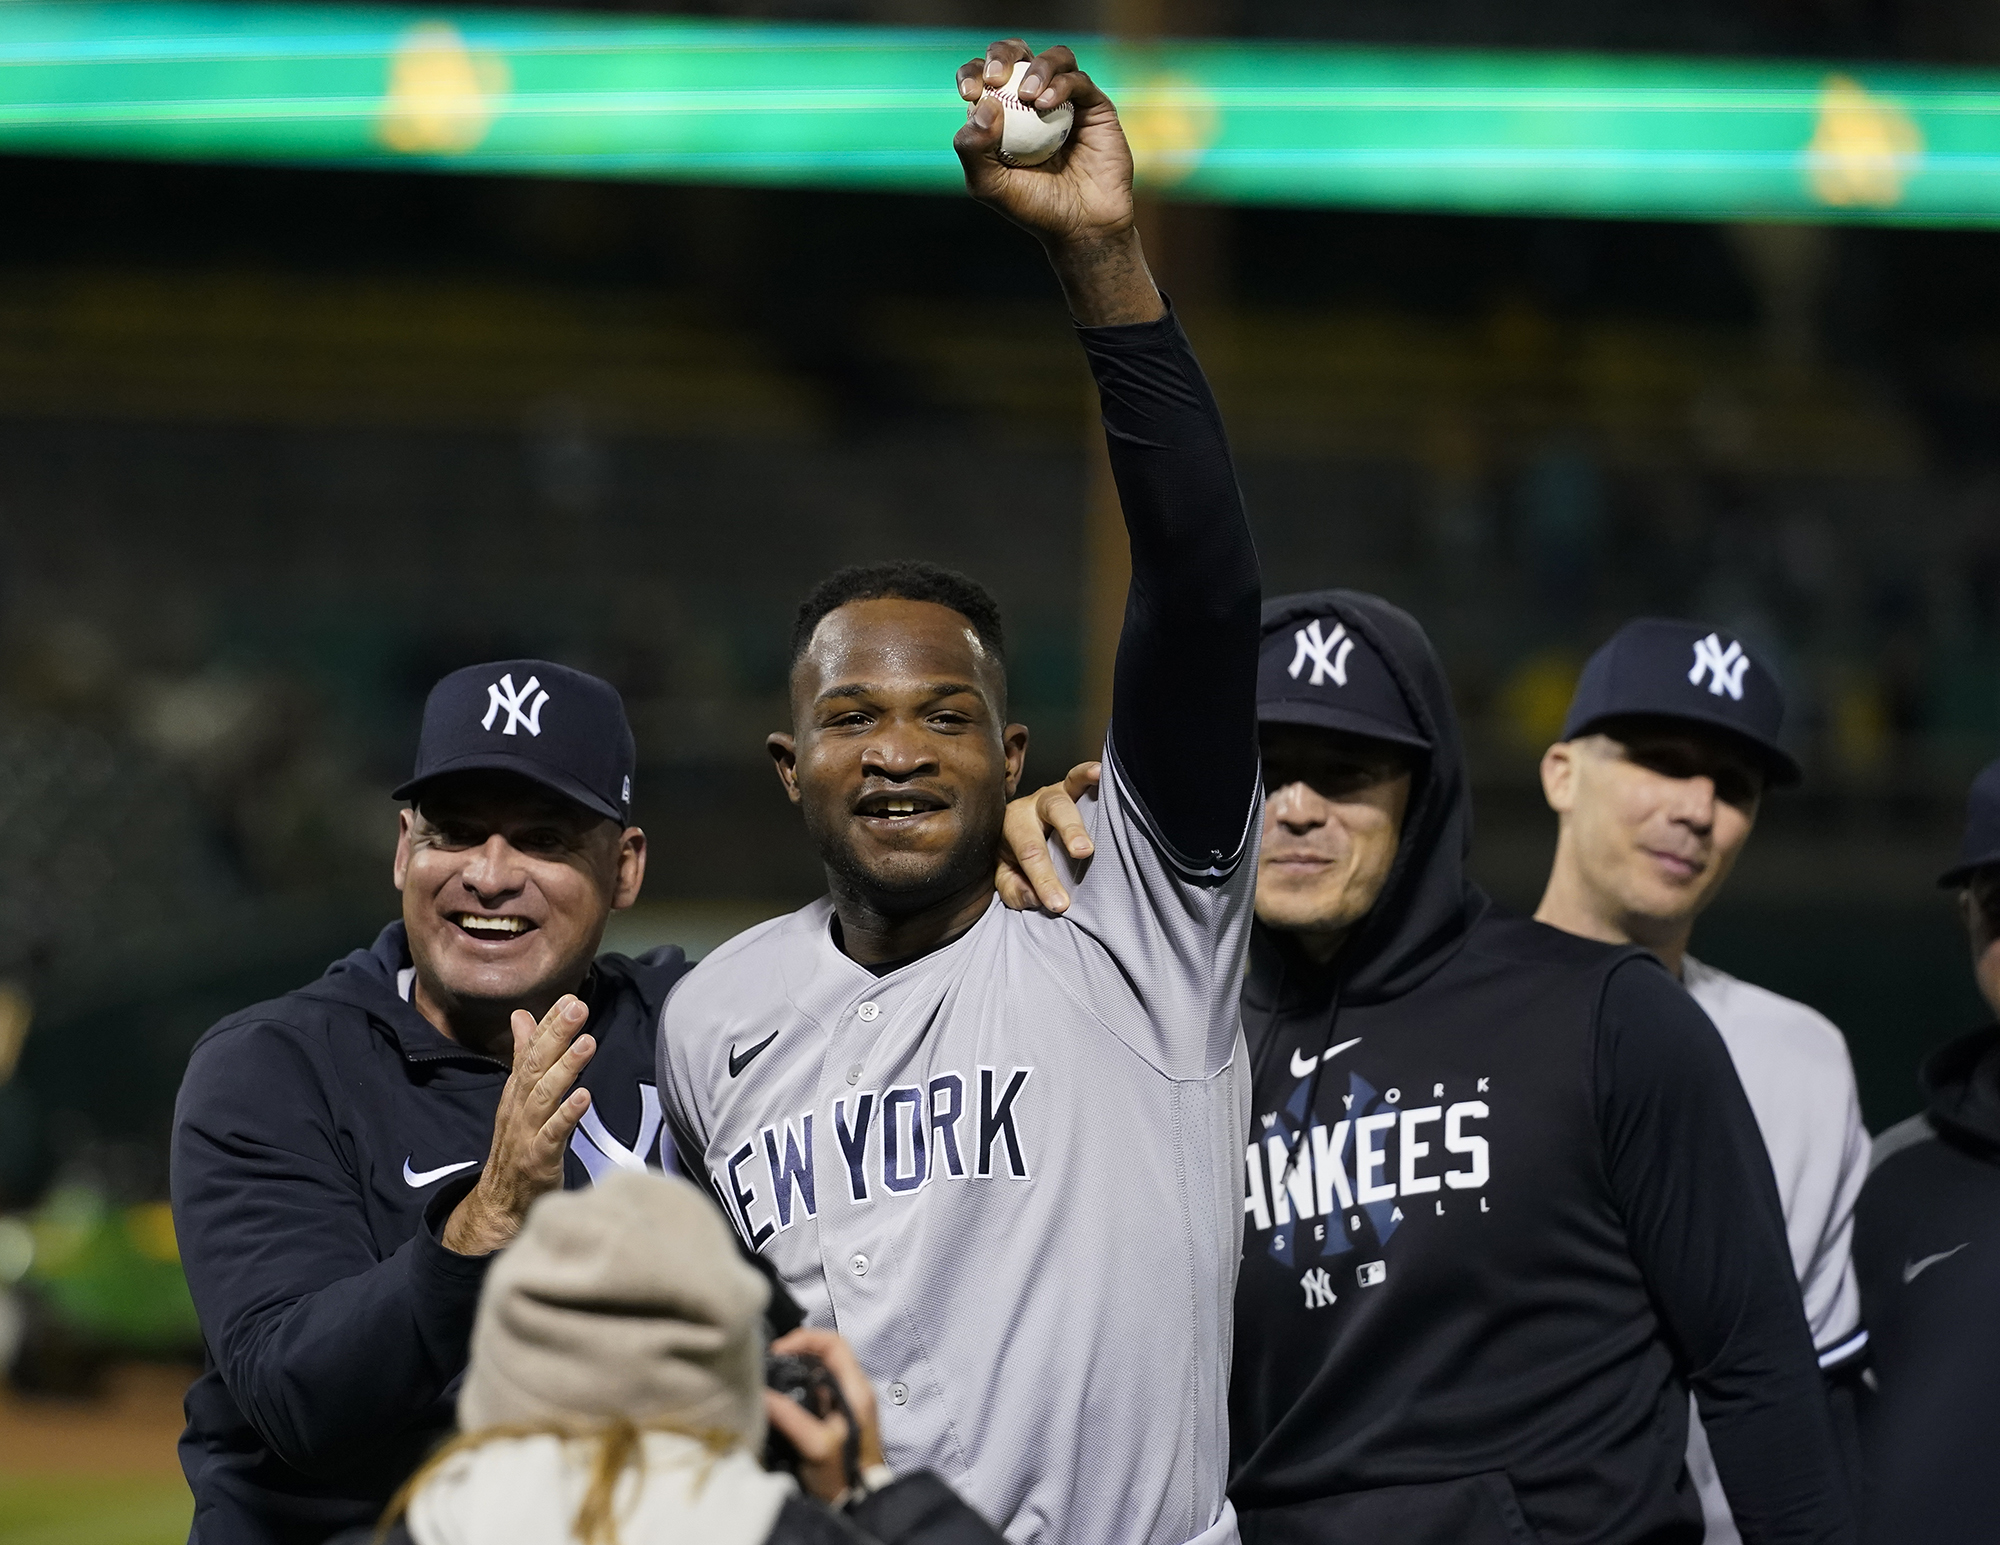 New York Yankees' Domingo Germán, center, celebrates after pitching a perfect game against the Oakland Athletics during a baseball game in Oakland, Calif., Wednesday, June 28, 2023. The Yankees won 11-0. (AP Photo/Godofredo A.